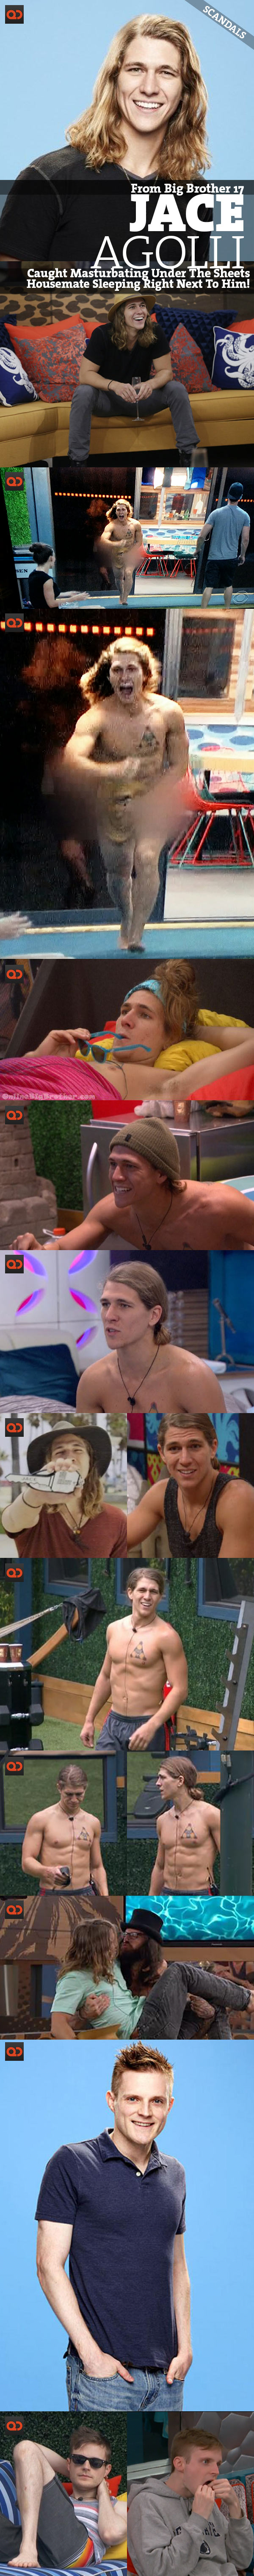 QC Scandals: Jace Agolli, From Big Brother 17, Caught Masturbating Under The Sheets While Housemate Was Sleeping Next To Him!